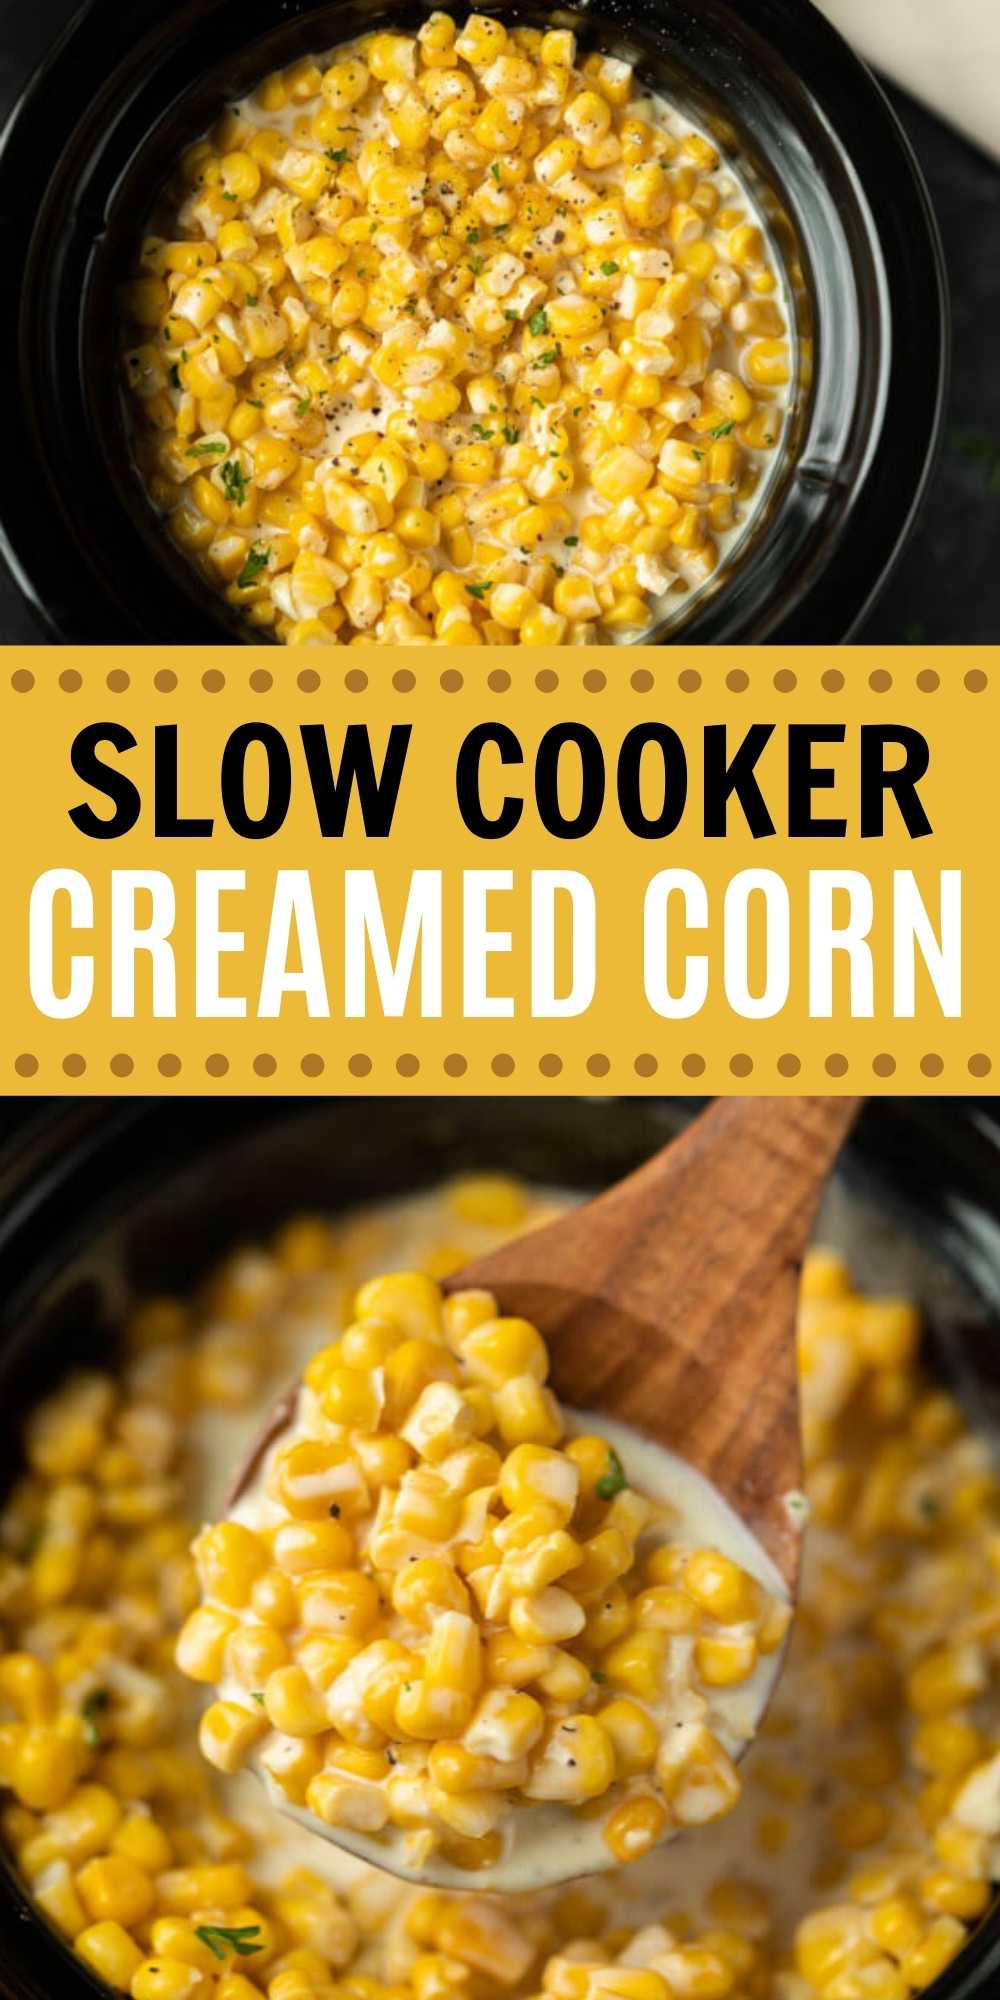 Creamed corn is easy to make in a slow cooker. This Slow Cooker creamed corn recipe is easy to make and delicious too! Crock Pot Creamed Corn is a simple side dish that is perfect for any occasion or holiday.  This is one of my favorite easy side dish recipes! #eatingonadime #creamedcorn #holidayrecipes #cornrecipes #crockpotrecipes #slowcookerrecipes 
